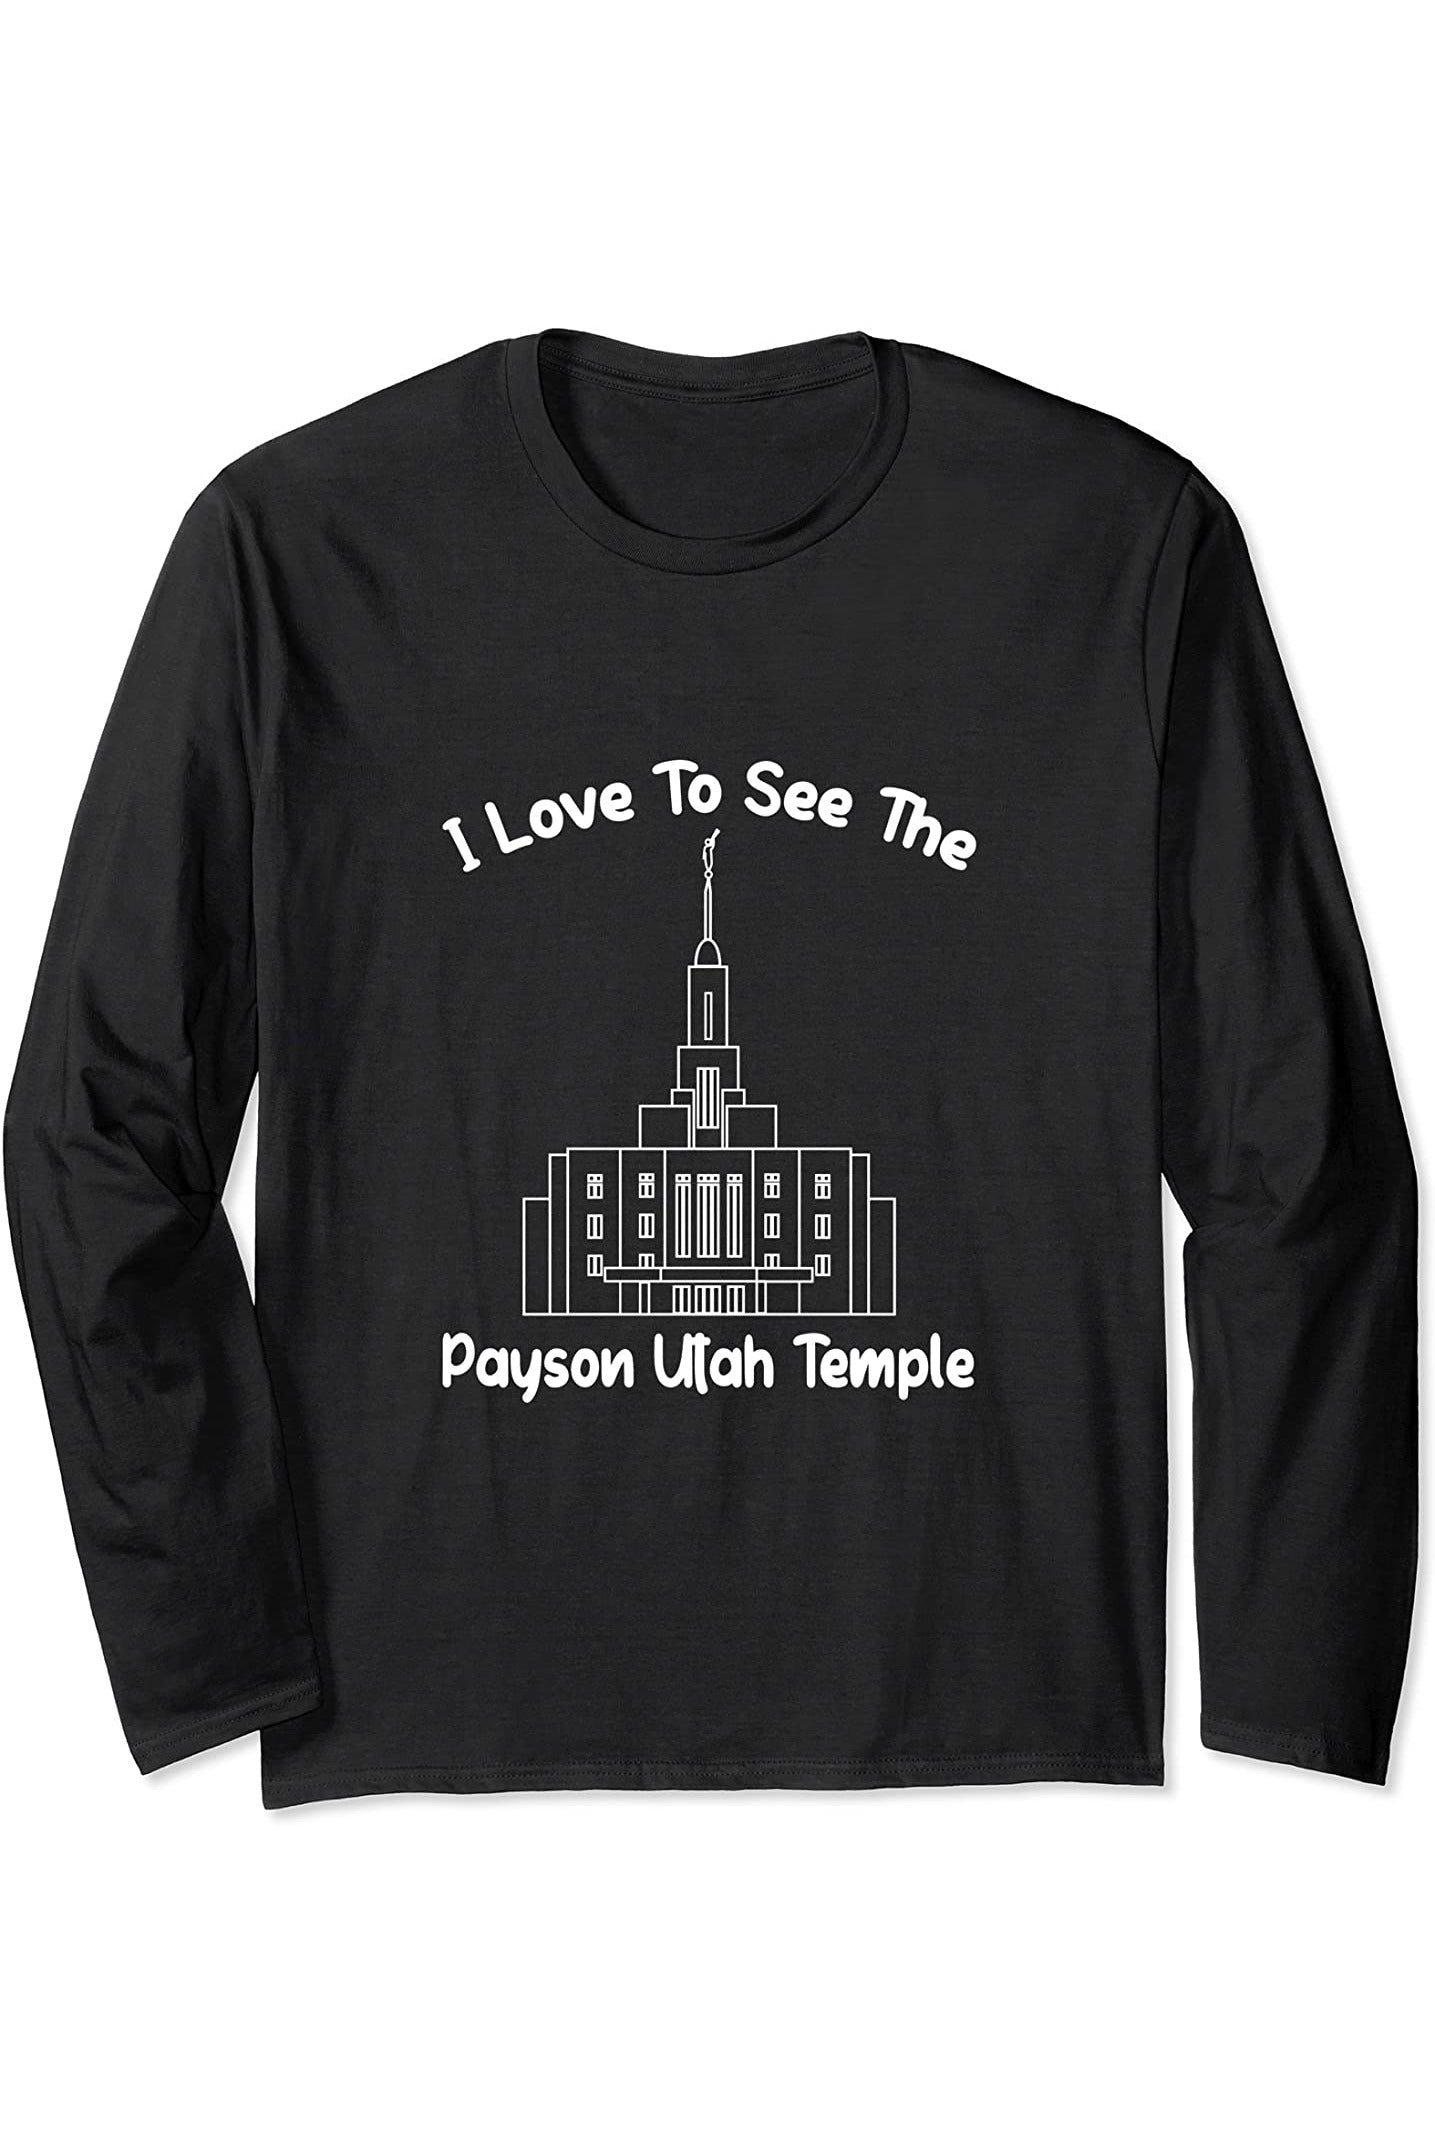 Payson Utah Temple Long Sleeve T-Shirt - Primary Style (English) US